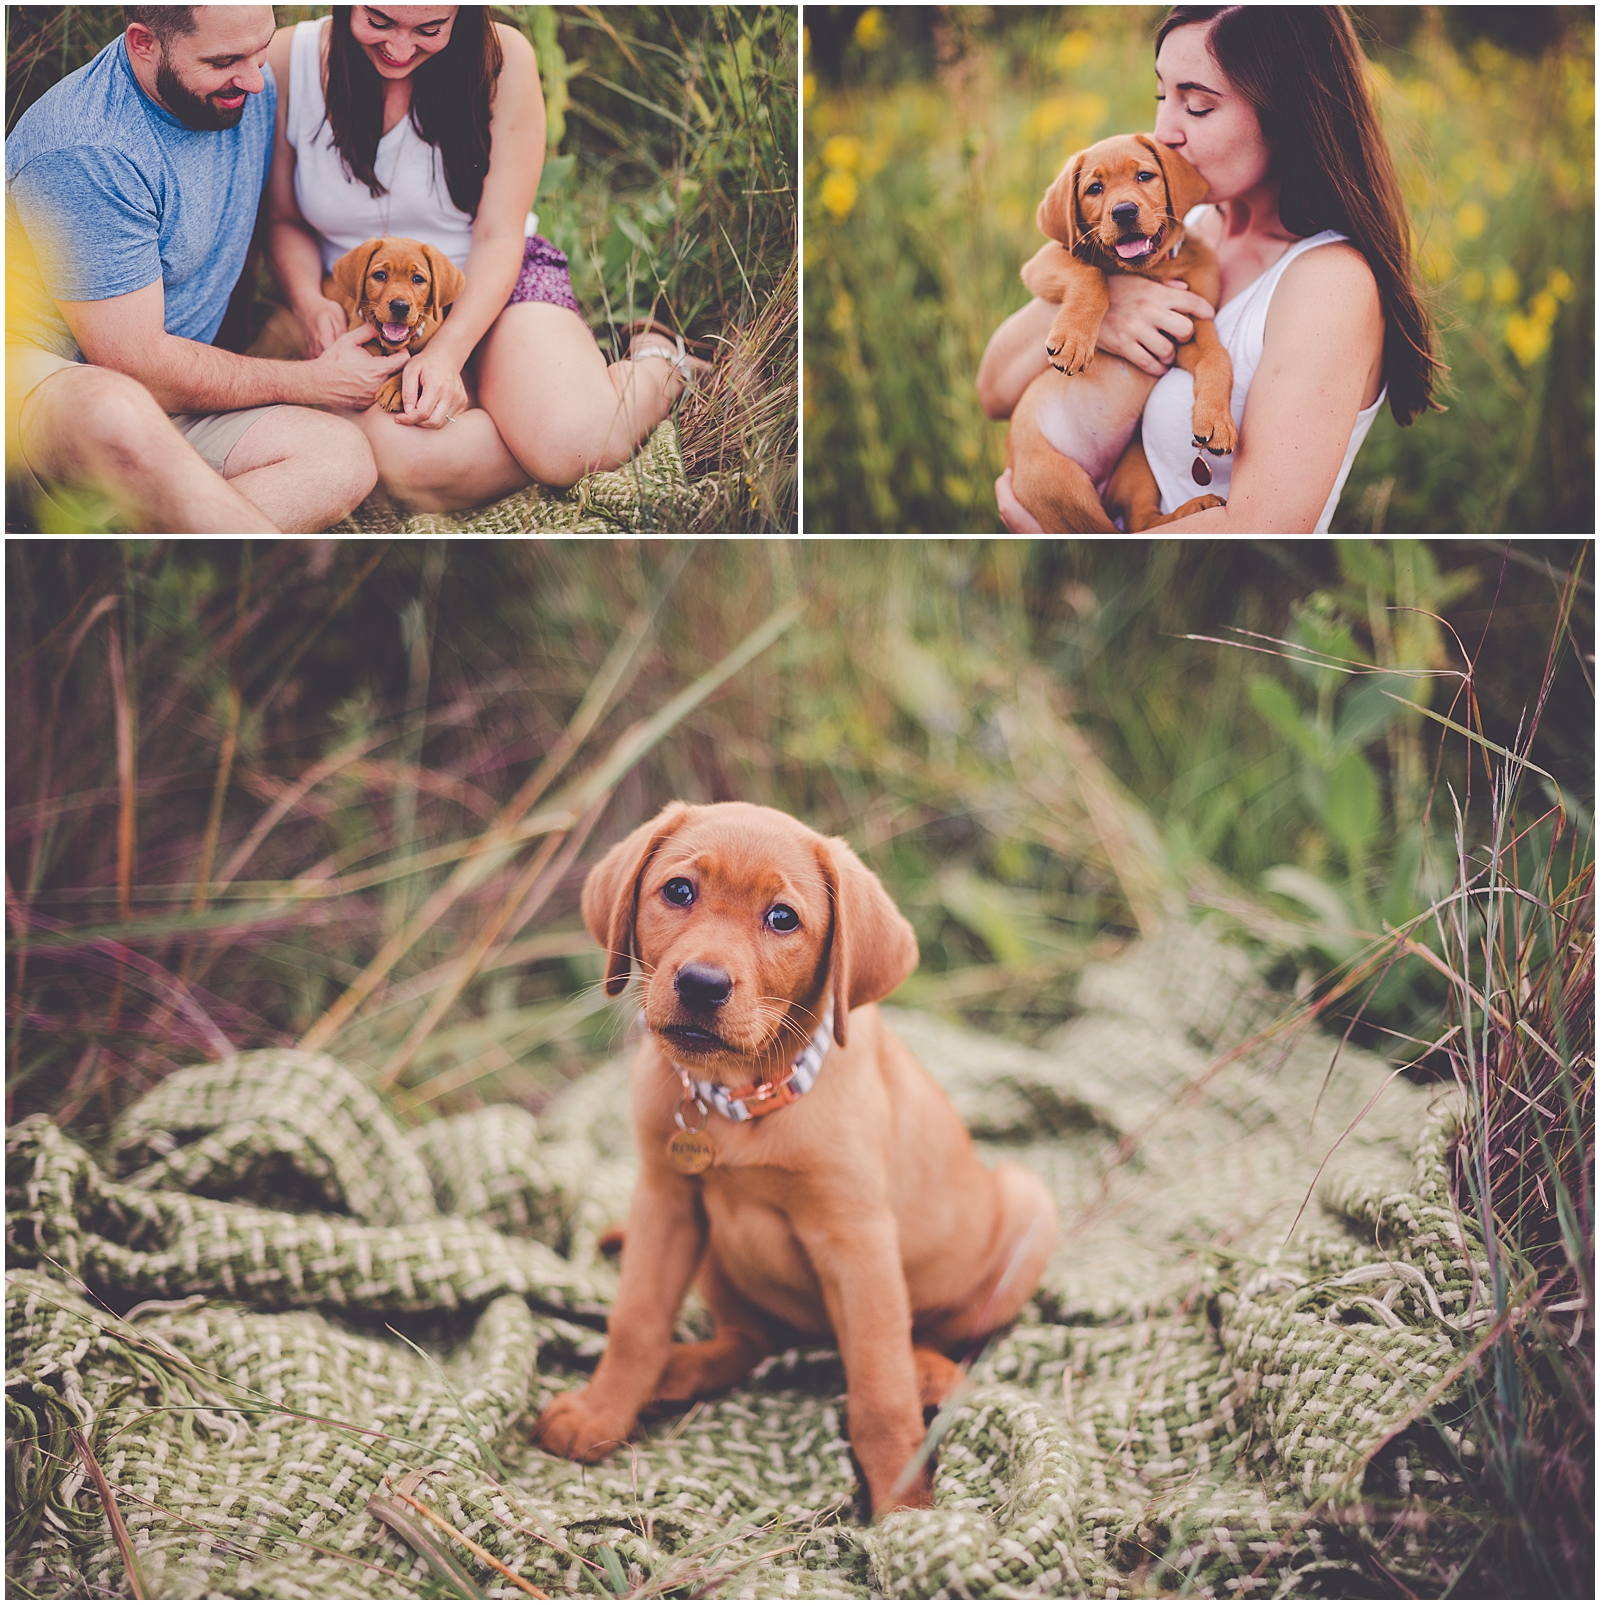 Summer sunset couples and new puppy session in Aroma Park, Illinois with Chicagoland wedding photographer Kara Evans Photographer.